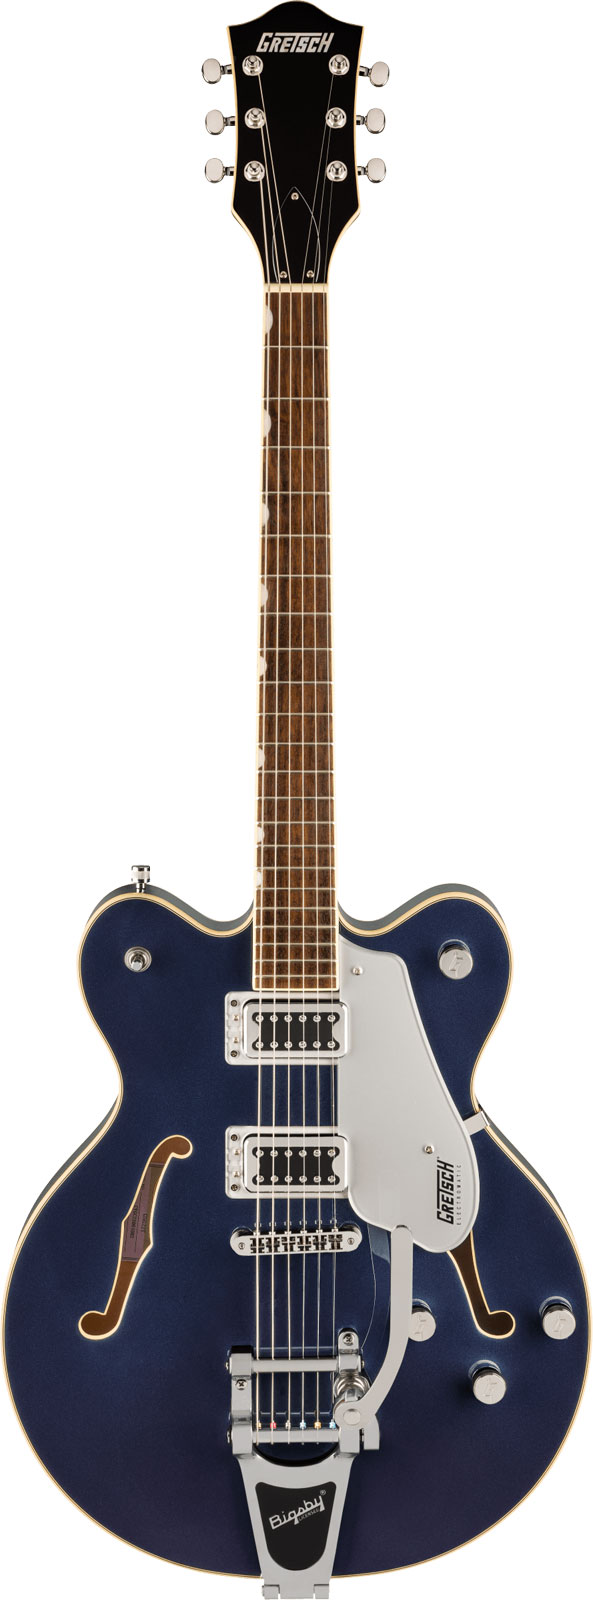 GRETSCH GUITARS G5622T ELECTROMATIC CENTER BLOCK DOUBLE-CUT WITH BIGSBY, LAUREL FINGERBOARD, MIDNIGHT SAPPHIRE